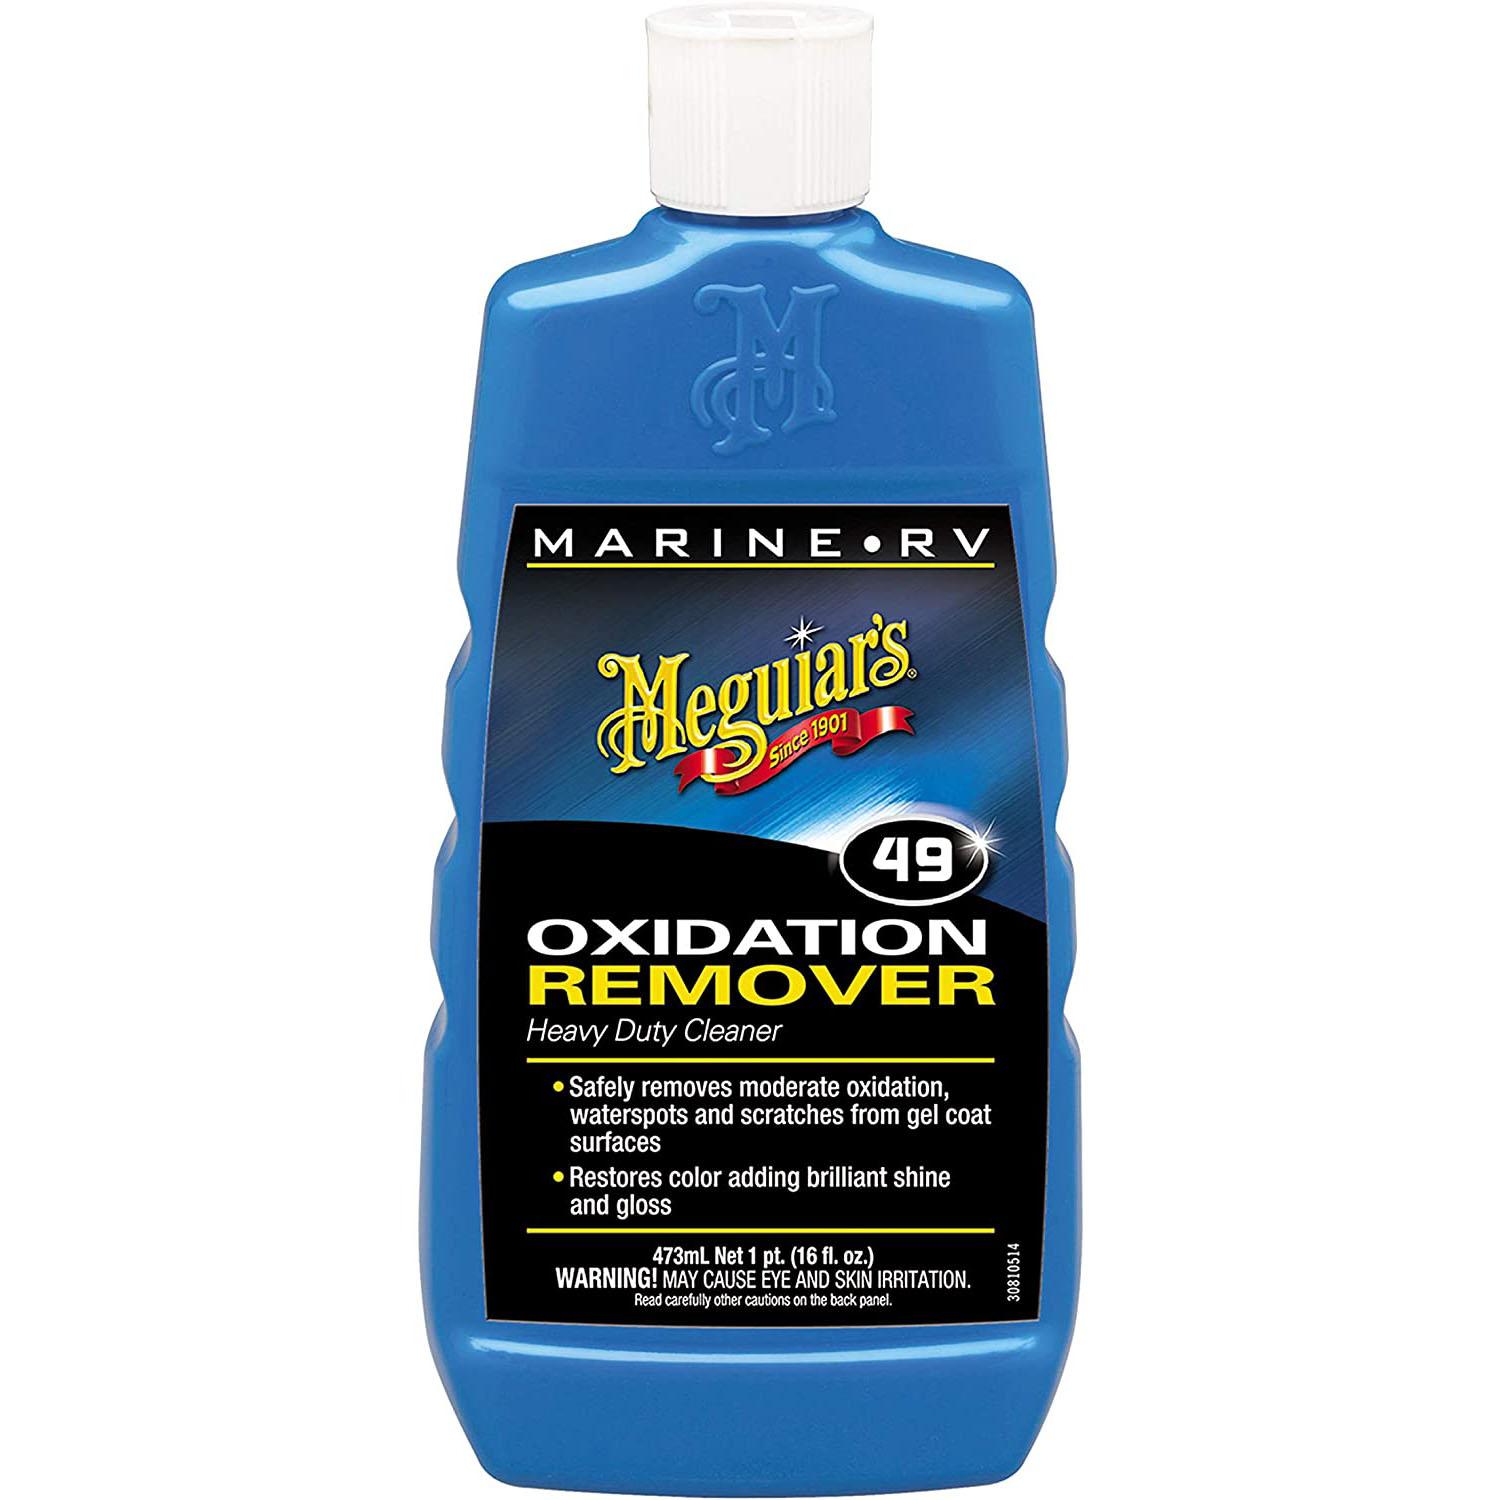 Meguiar's M4916 Marine RV Heavy Duty Oxidation Remover for $7.07 Shipped